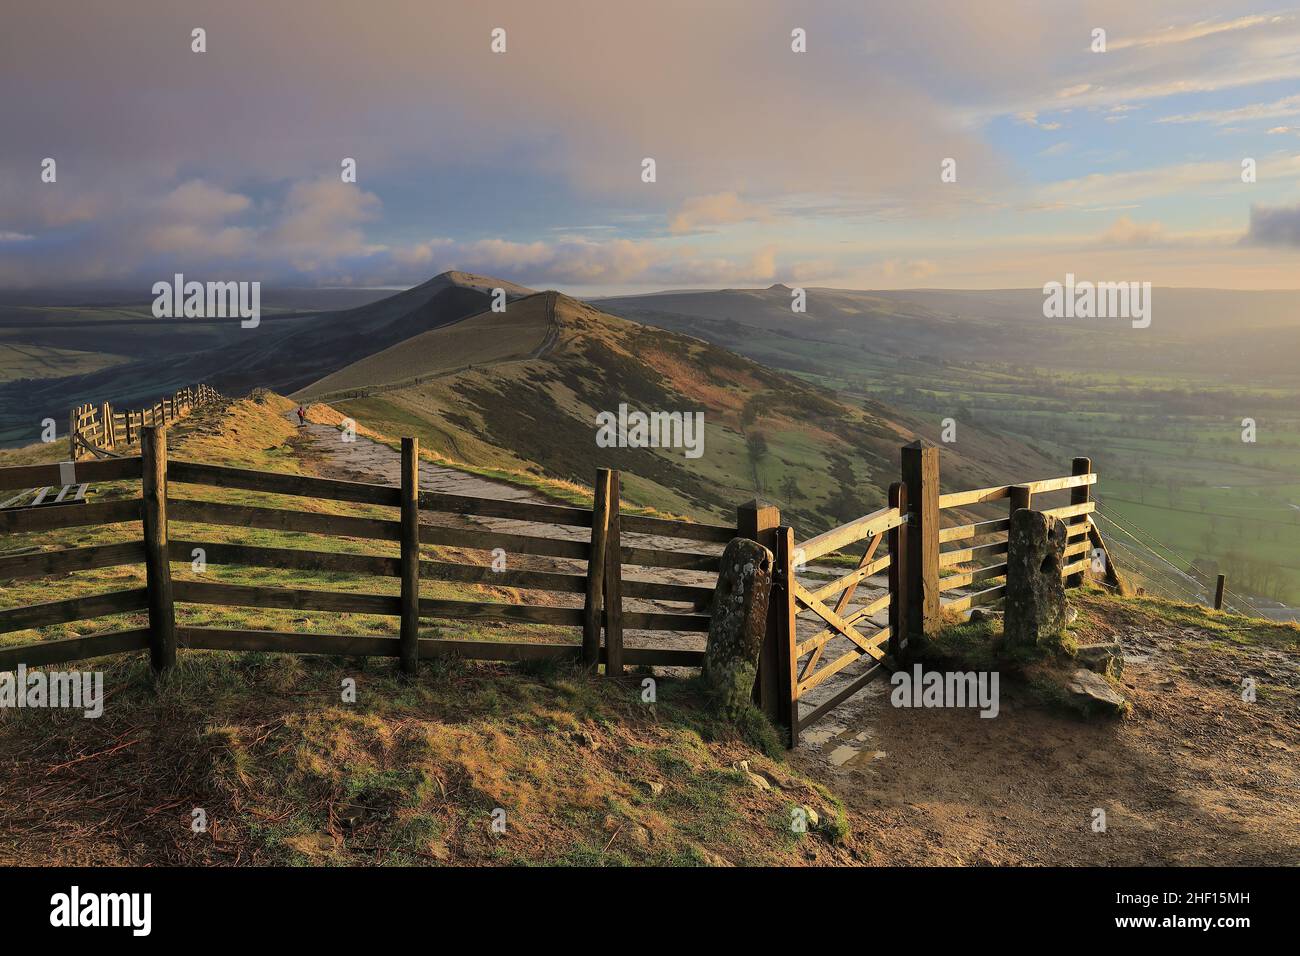 Mam Tor, in the High Peak area of thePeak District National Park, UK Stock Photo